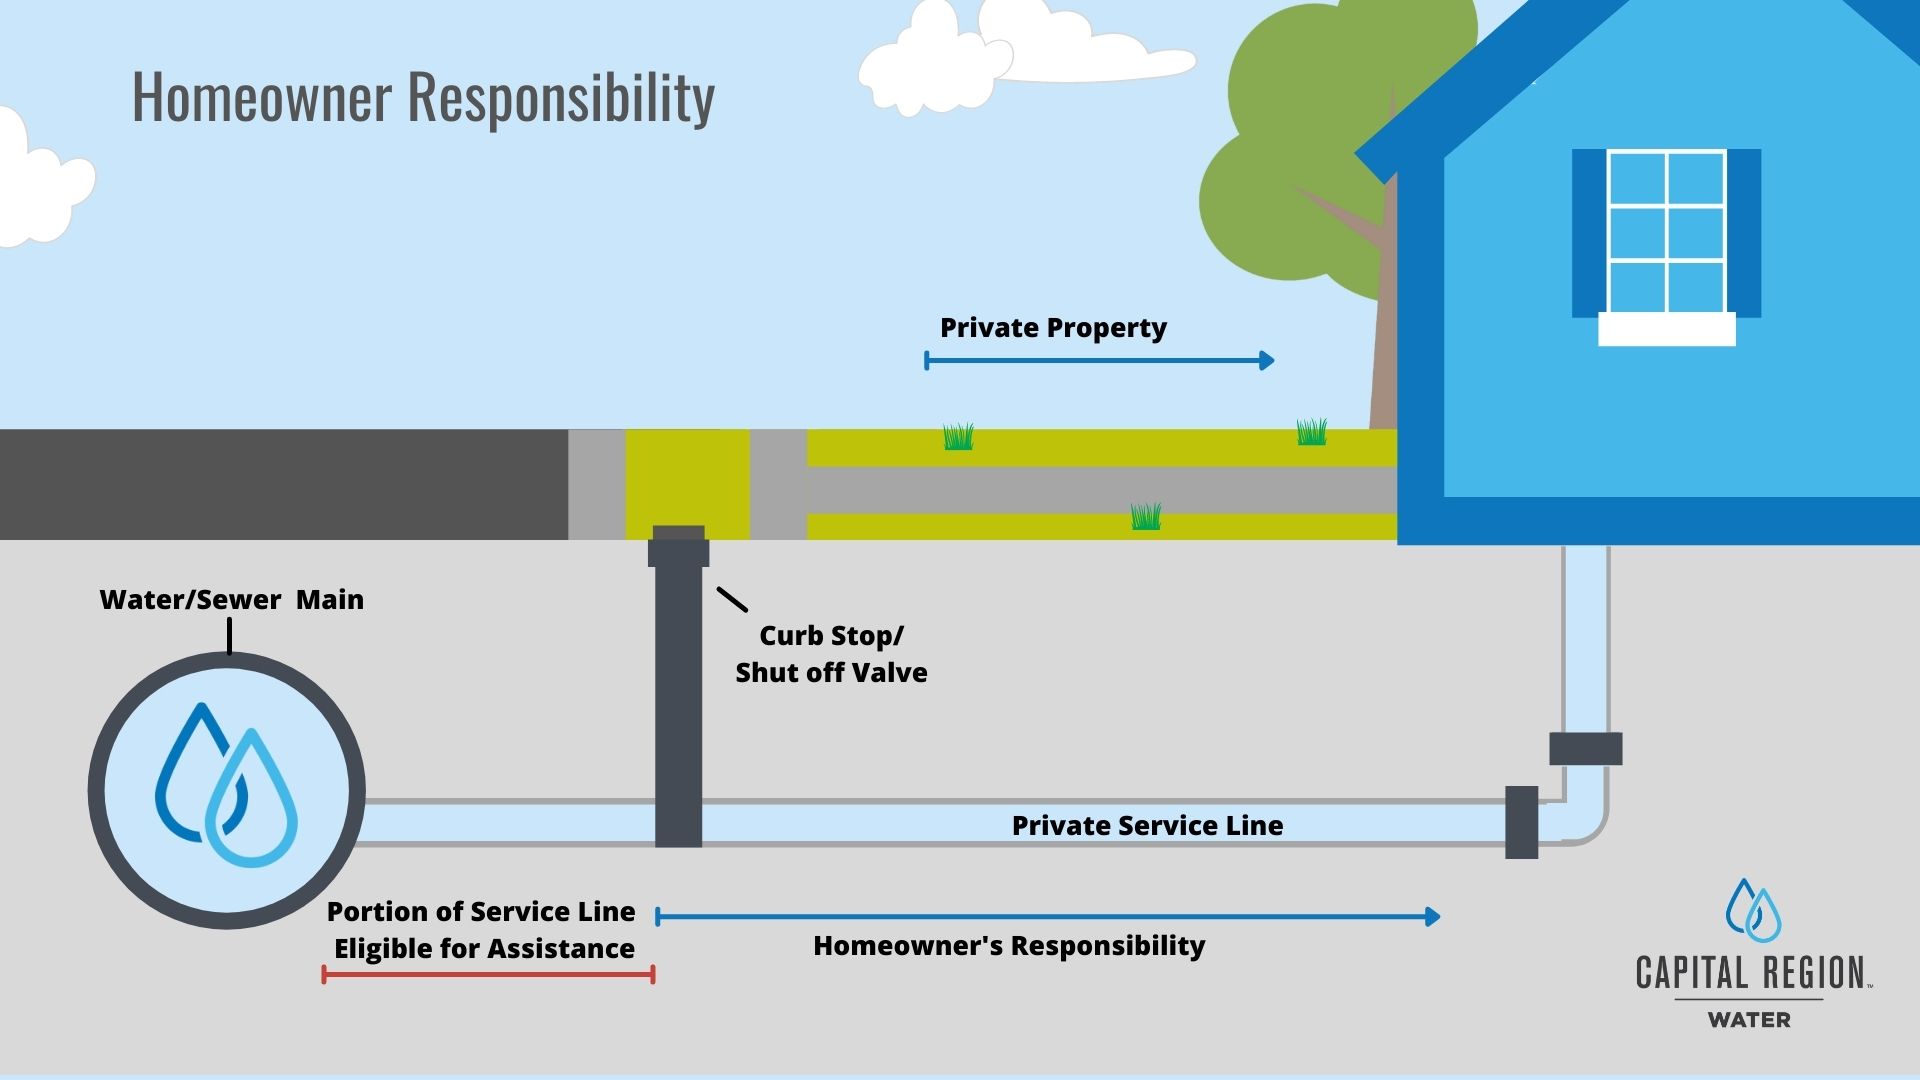 Homeowner Guidelines and Responsibilities - Capital Region Water